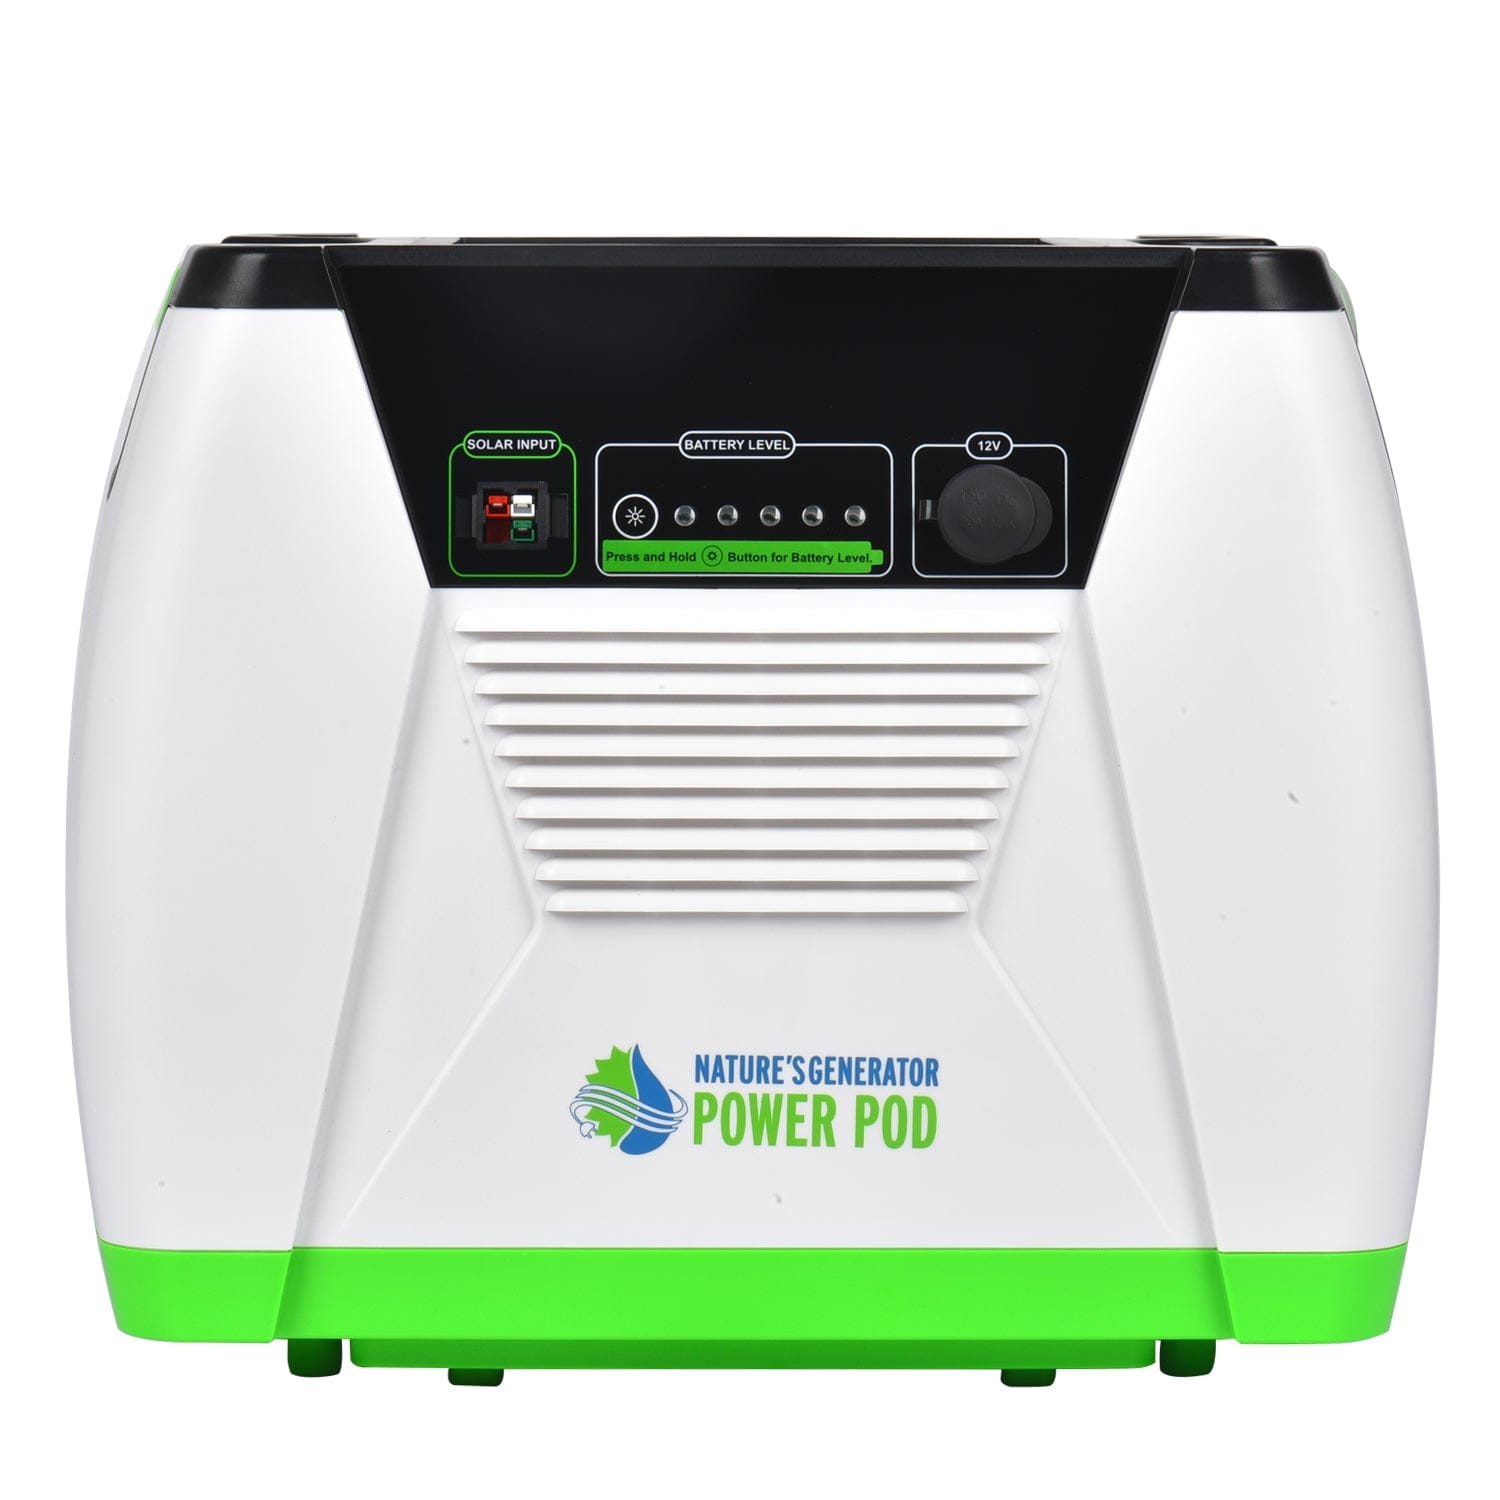 Nature's Generator 1800W Power Pod Front View